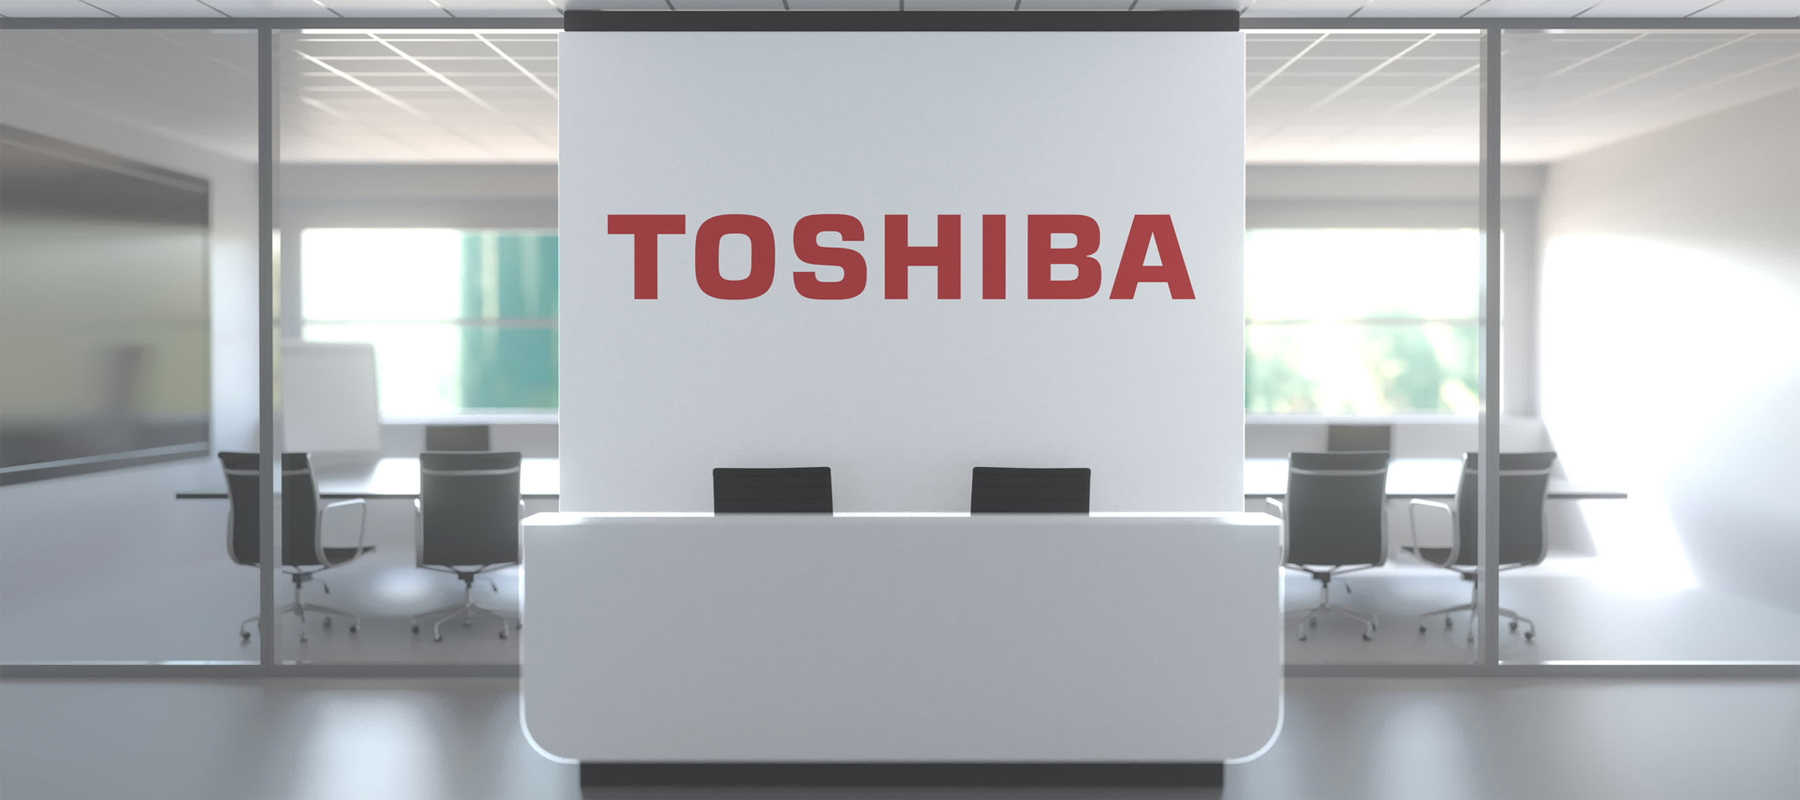 Toshiba Logo in Modern Office Conference Room